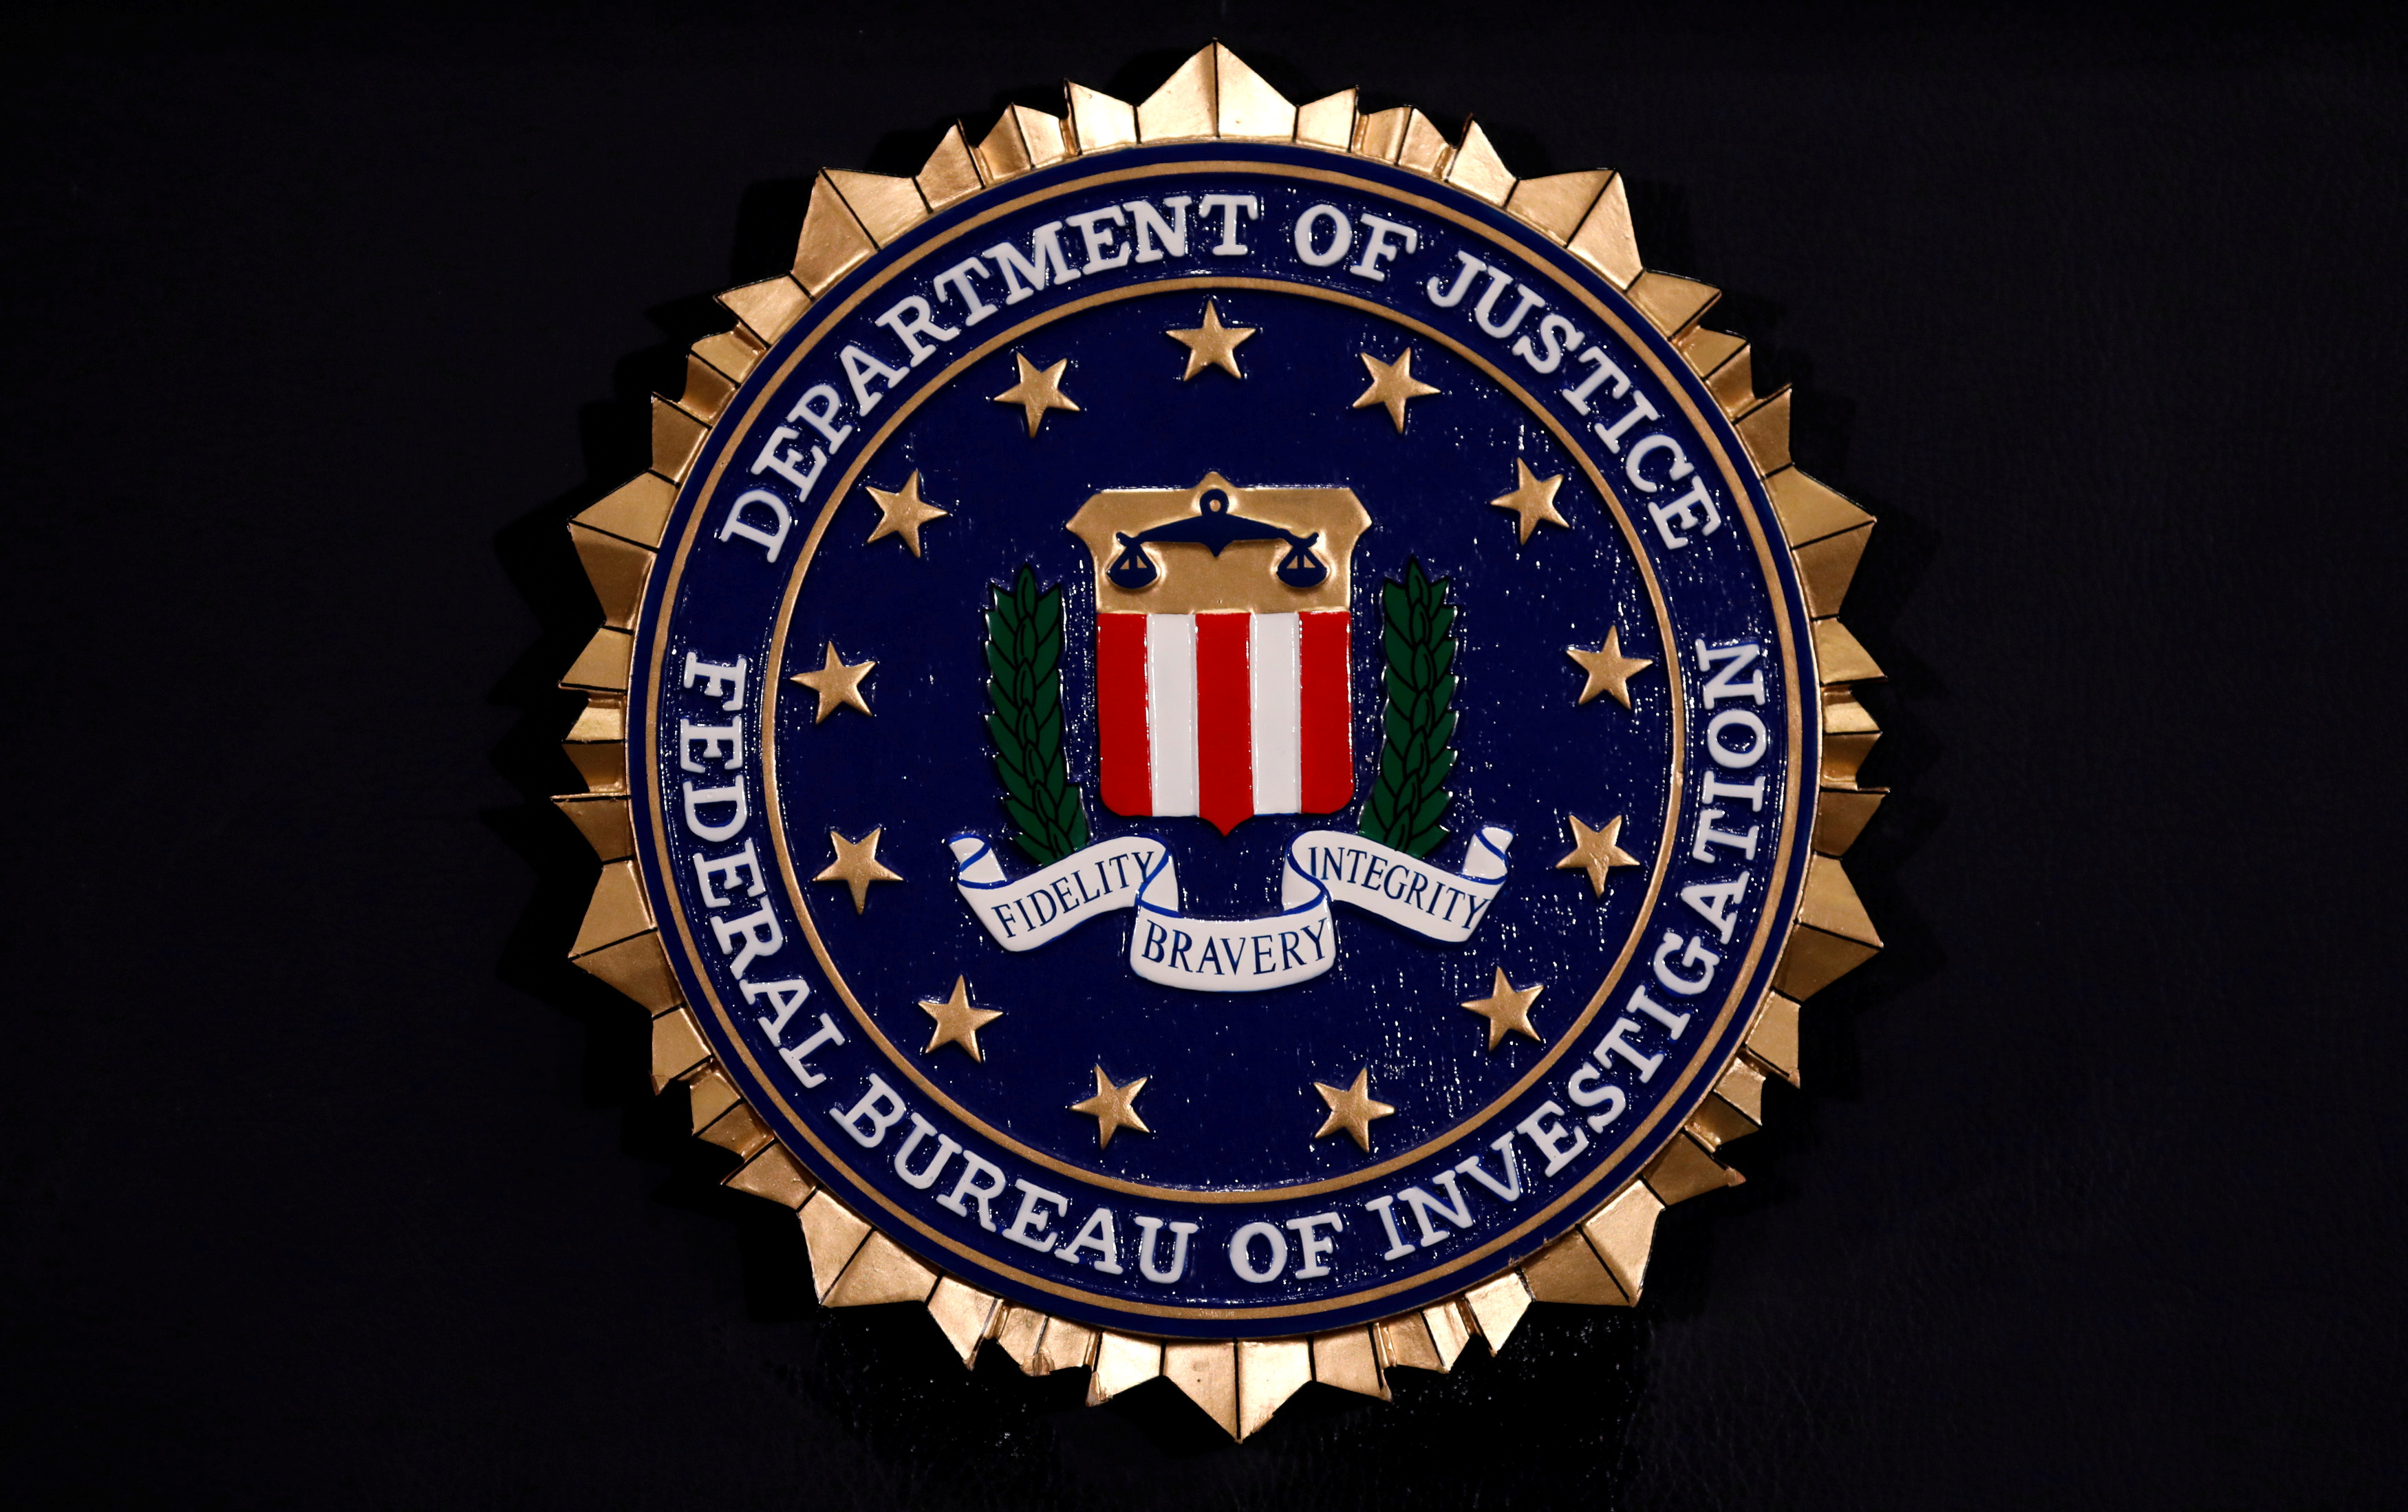 The Federal Bureau Investigation seal is seen at FBI headquarters before a news conference by the FBI director in Washington